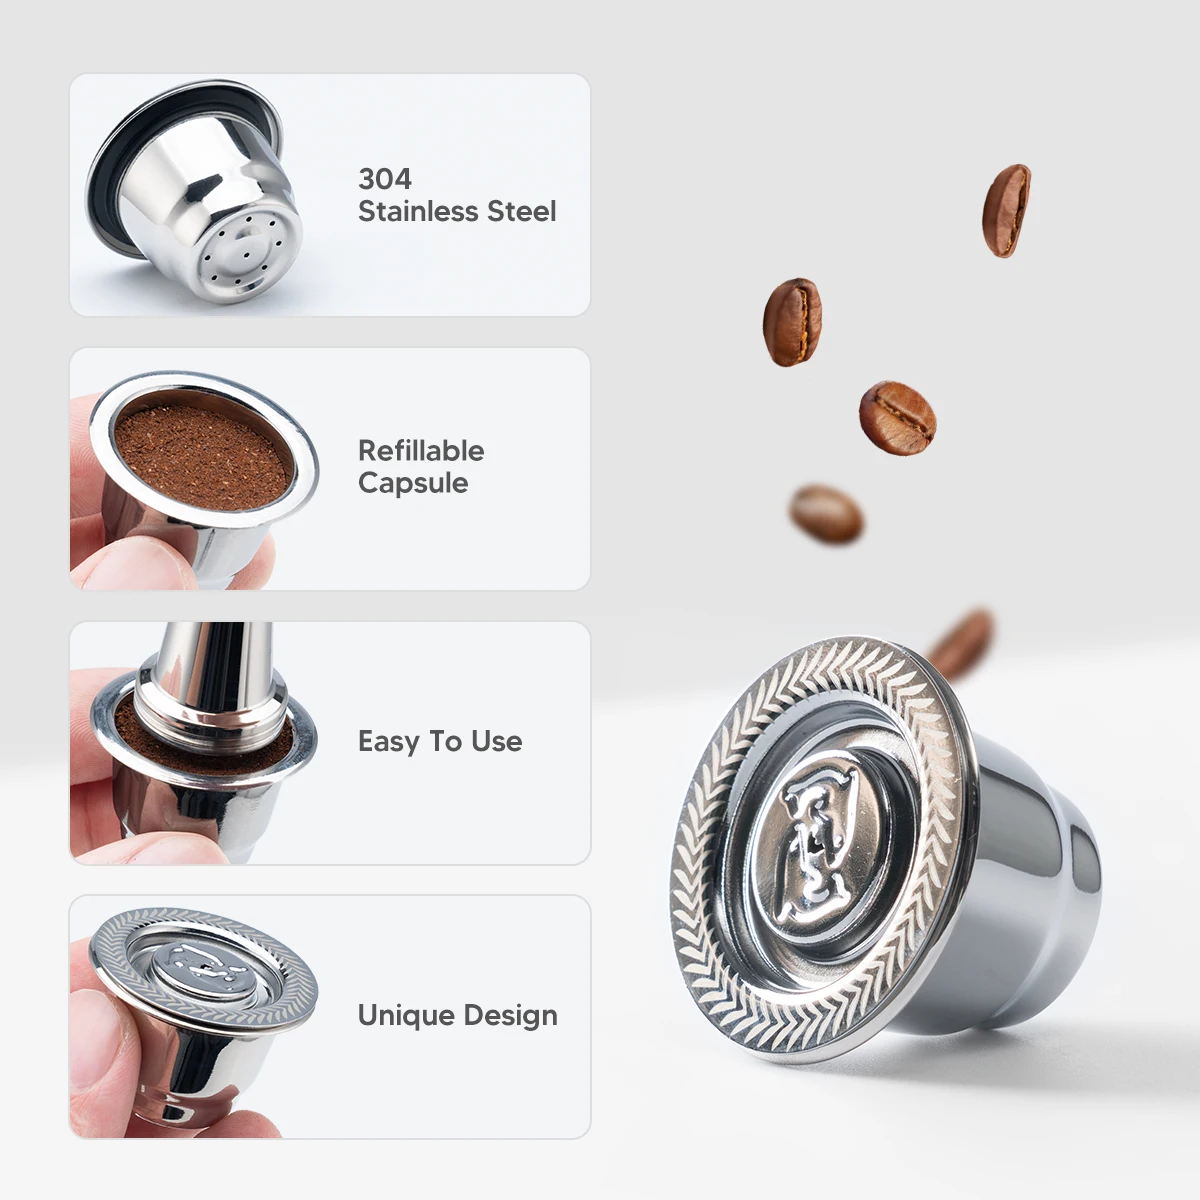 

Reusable 304 Stainless Steel Espresso Coffee Capsule for Nespresso Machines Refillable Coffee Filter Pods with Tamper Spoon